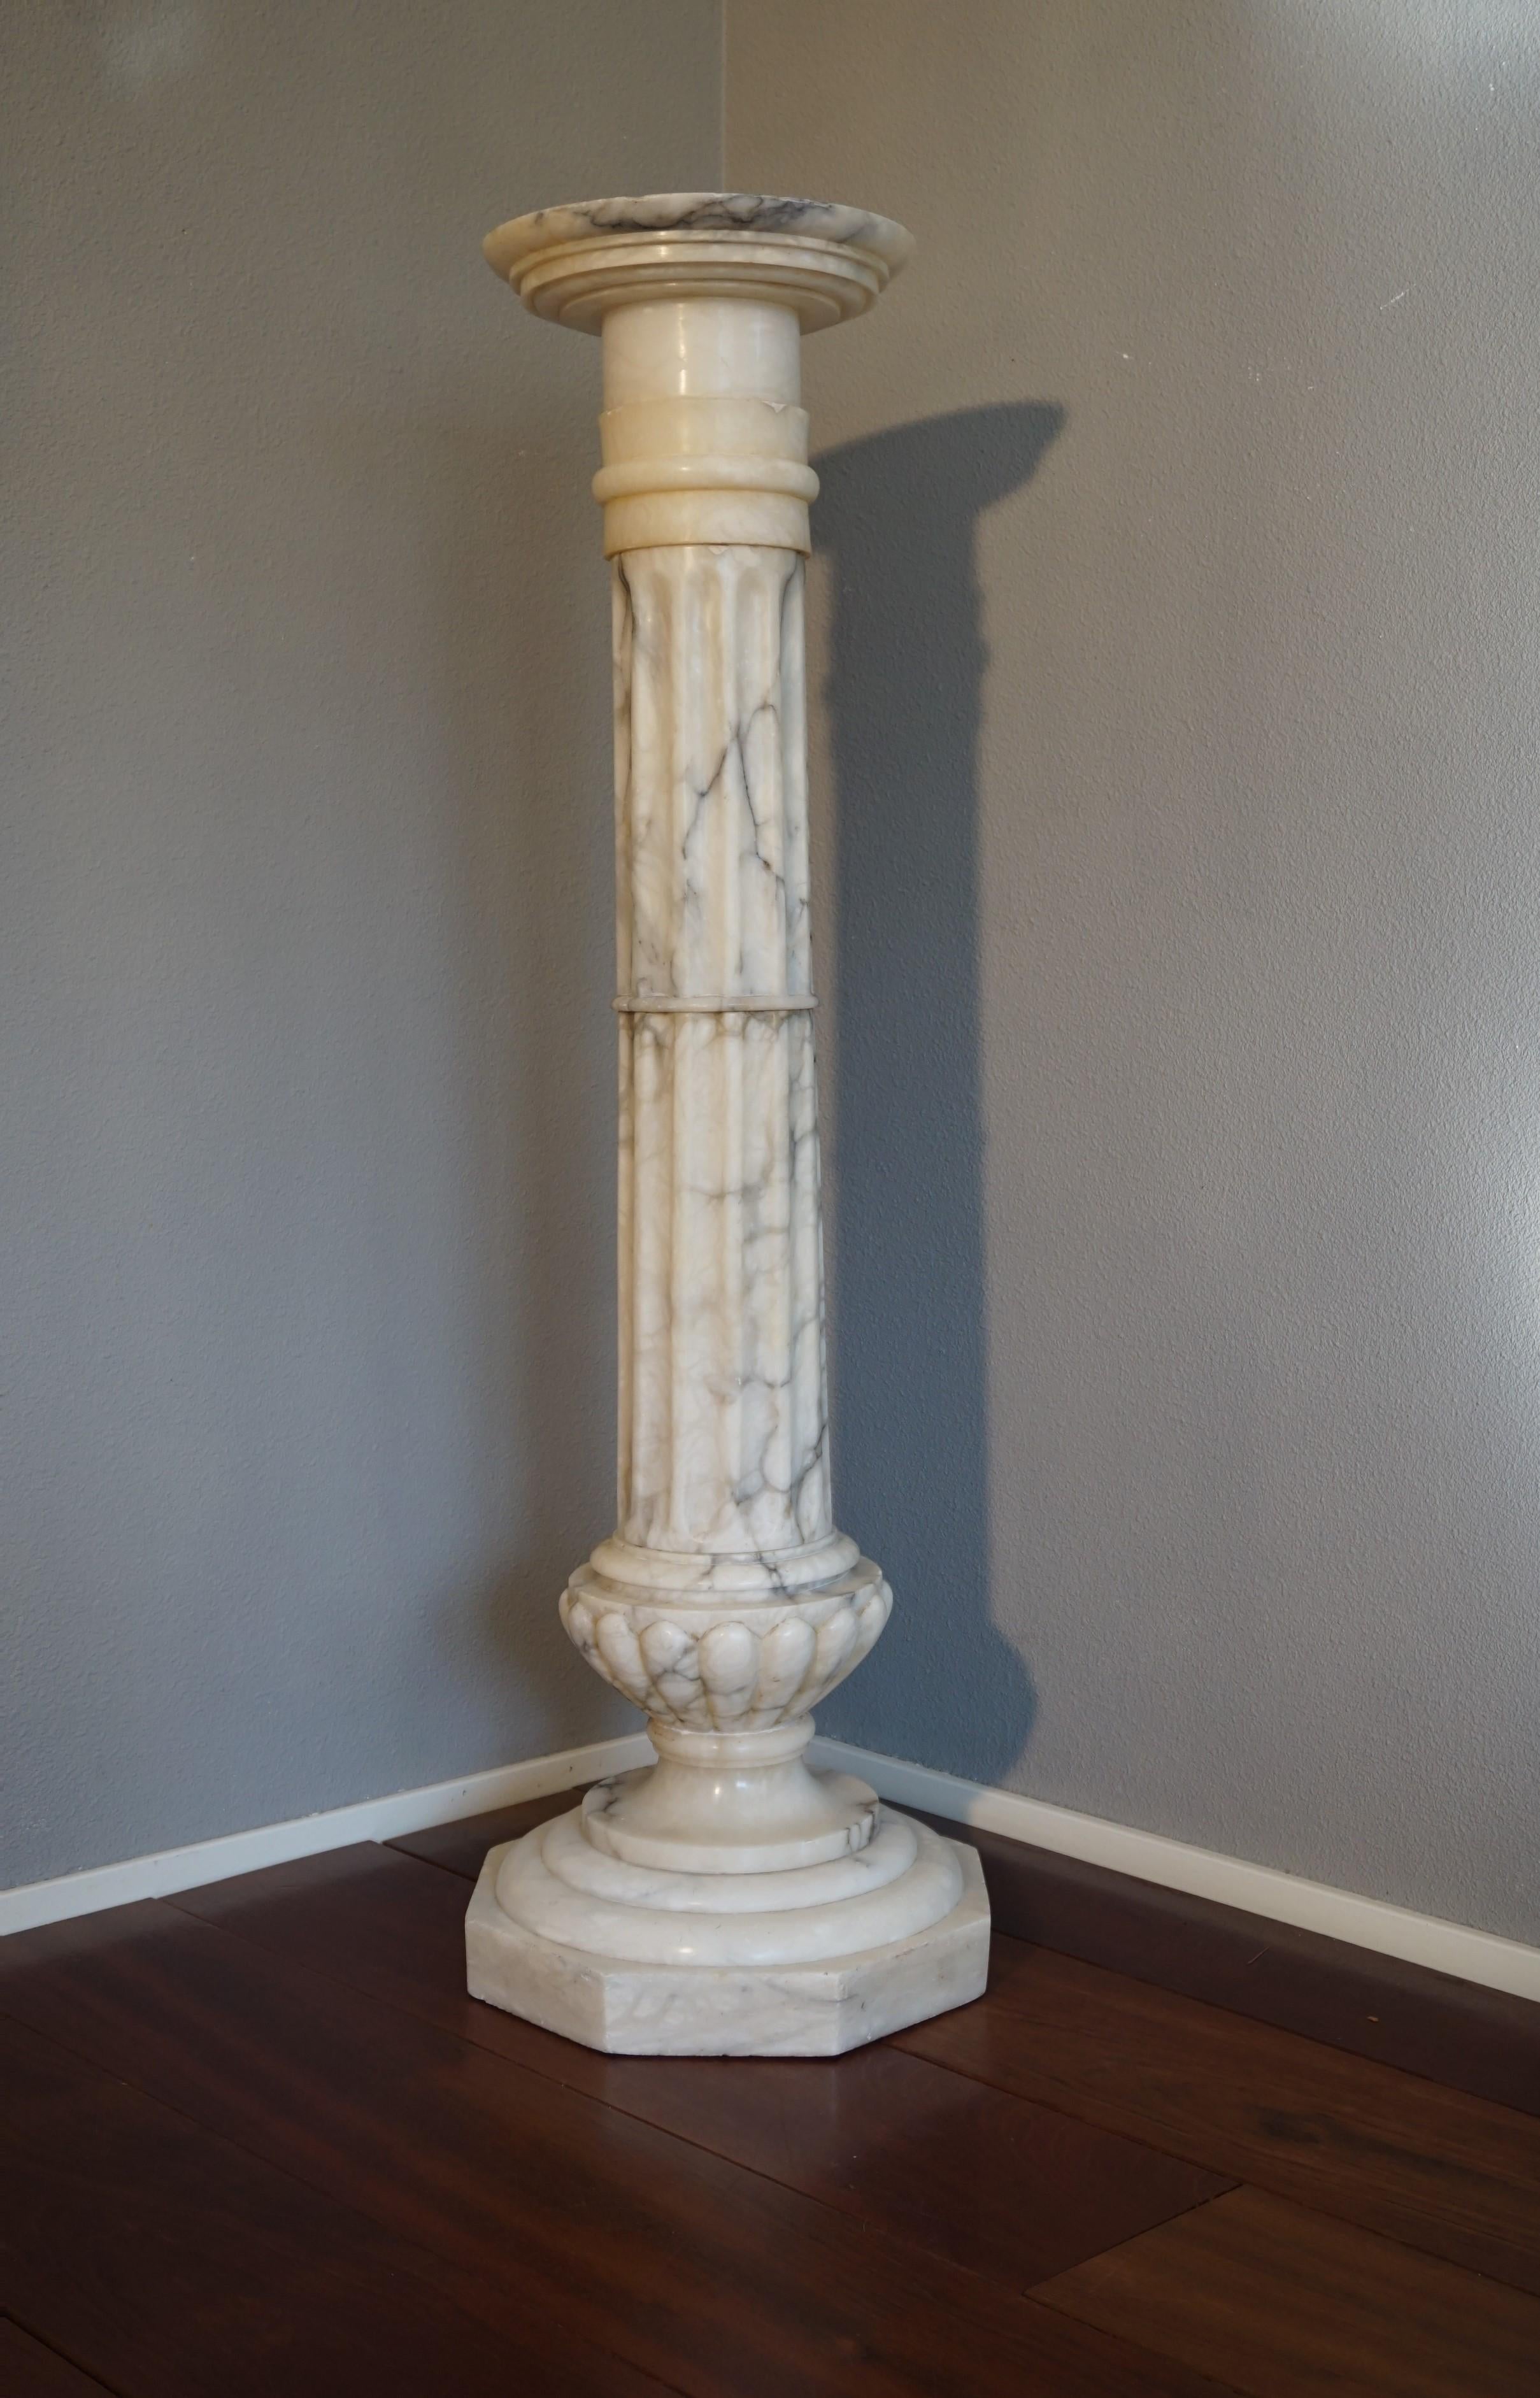 Wonderful antique column for displaying a work of art.

This beautiful and classical pedestal is perfect for showcasing an antique sculpture or bust. The slight wear, the shape and the wonderful, grey veins in the beige-white alabaster give this